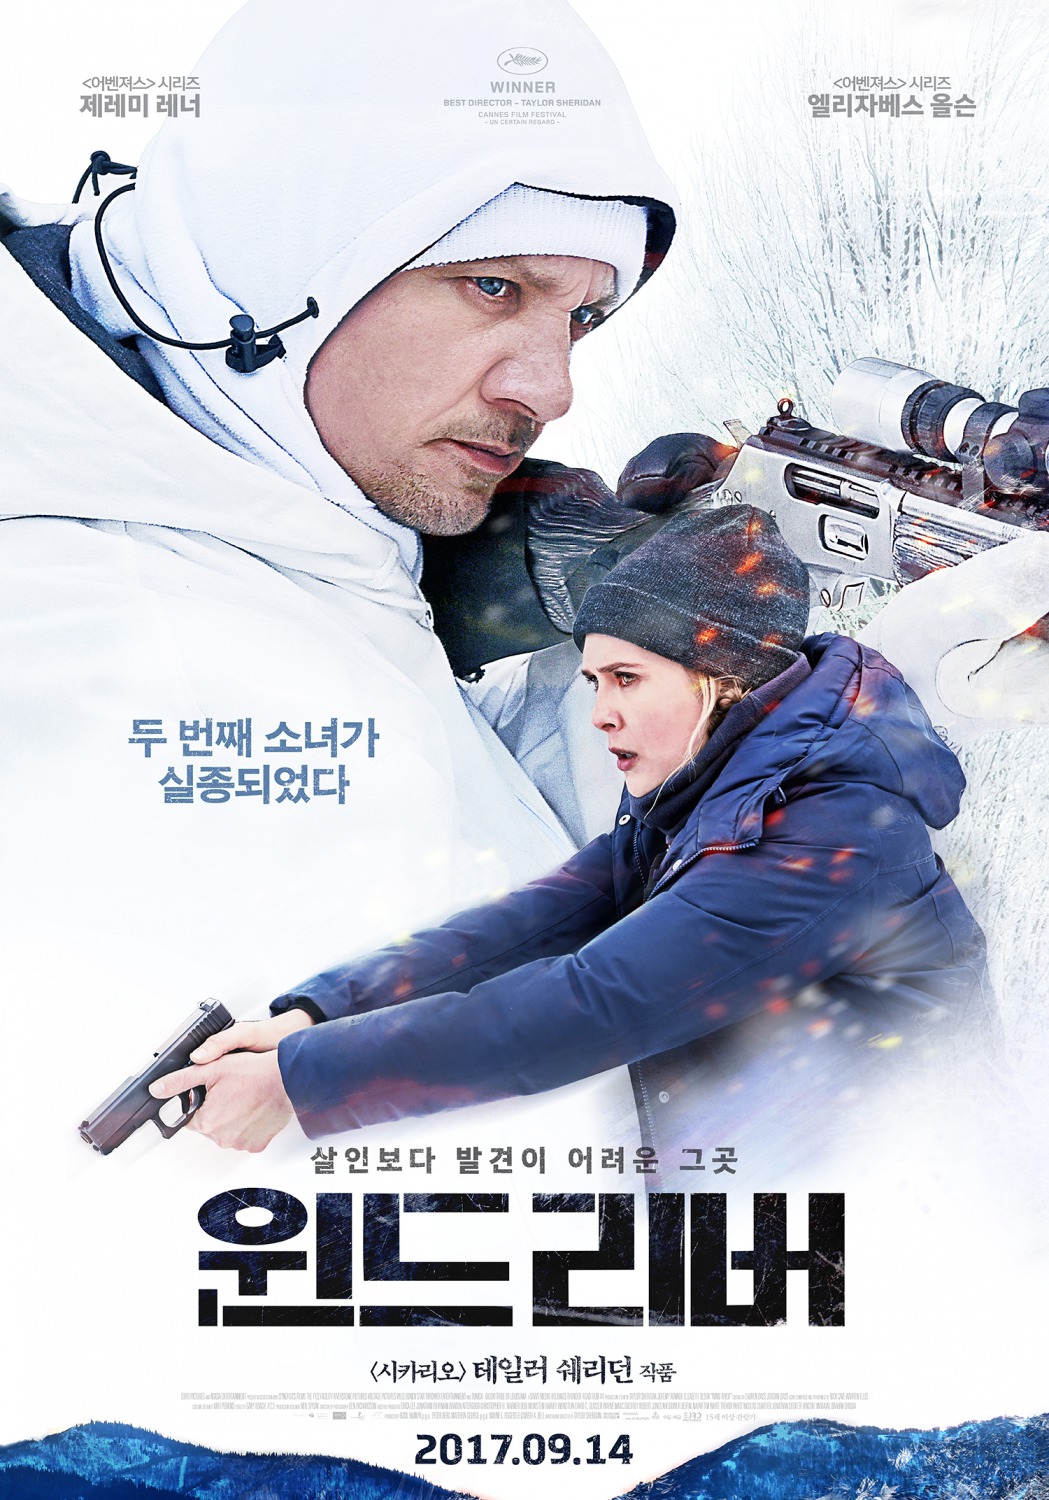 Extra Large Movie Poster Image for Wind River (#7 of 8)